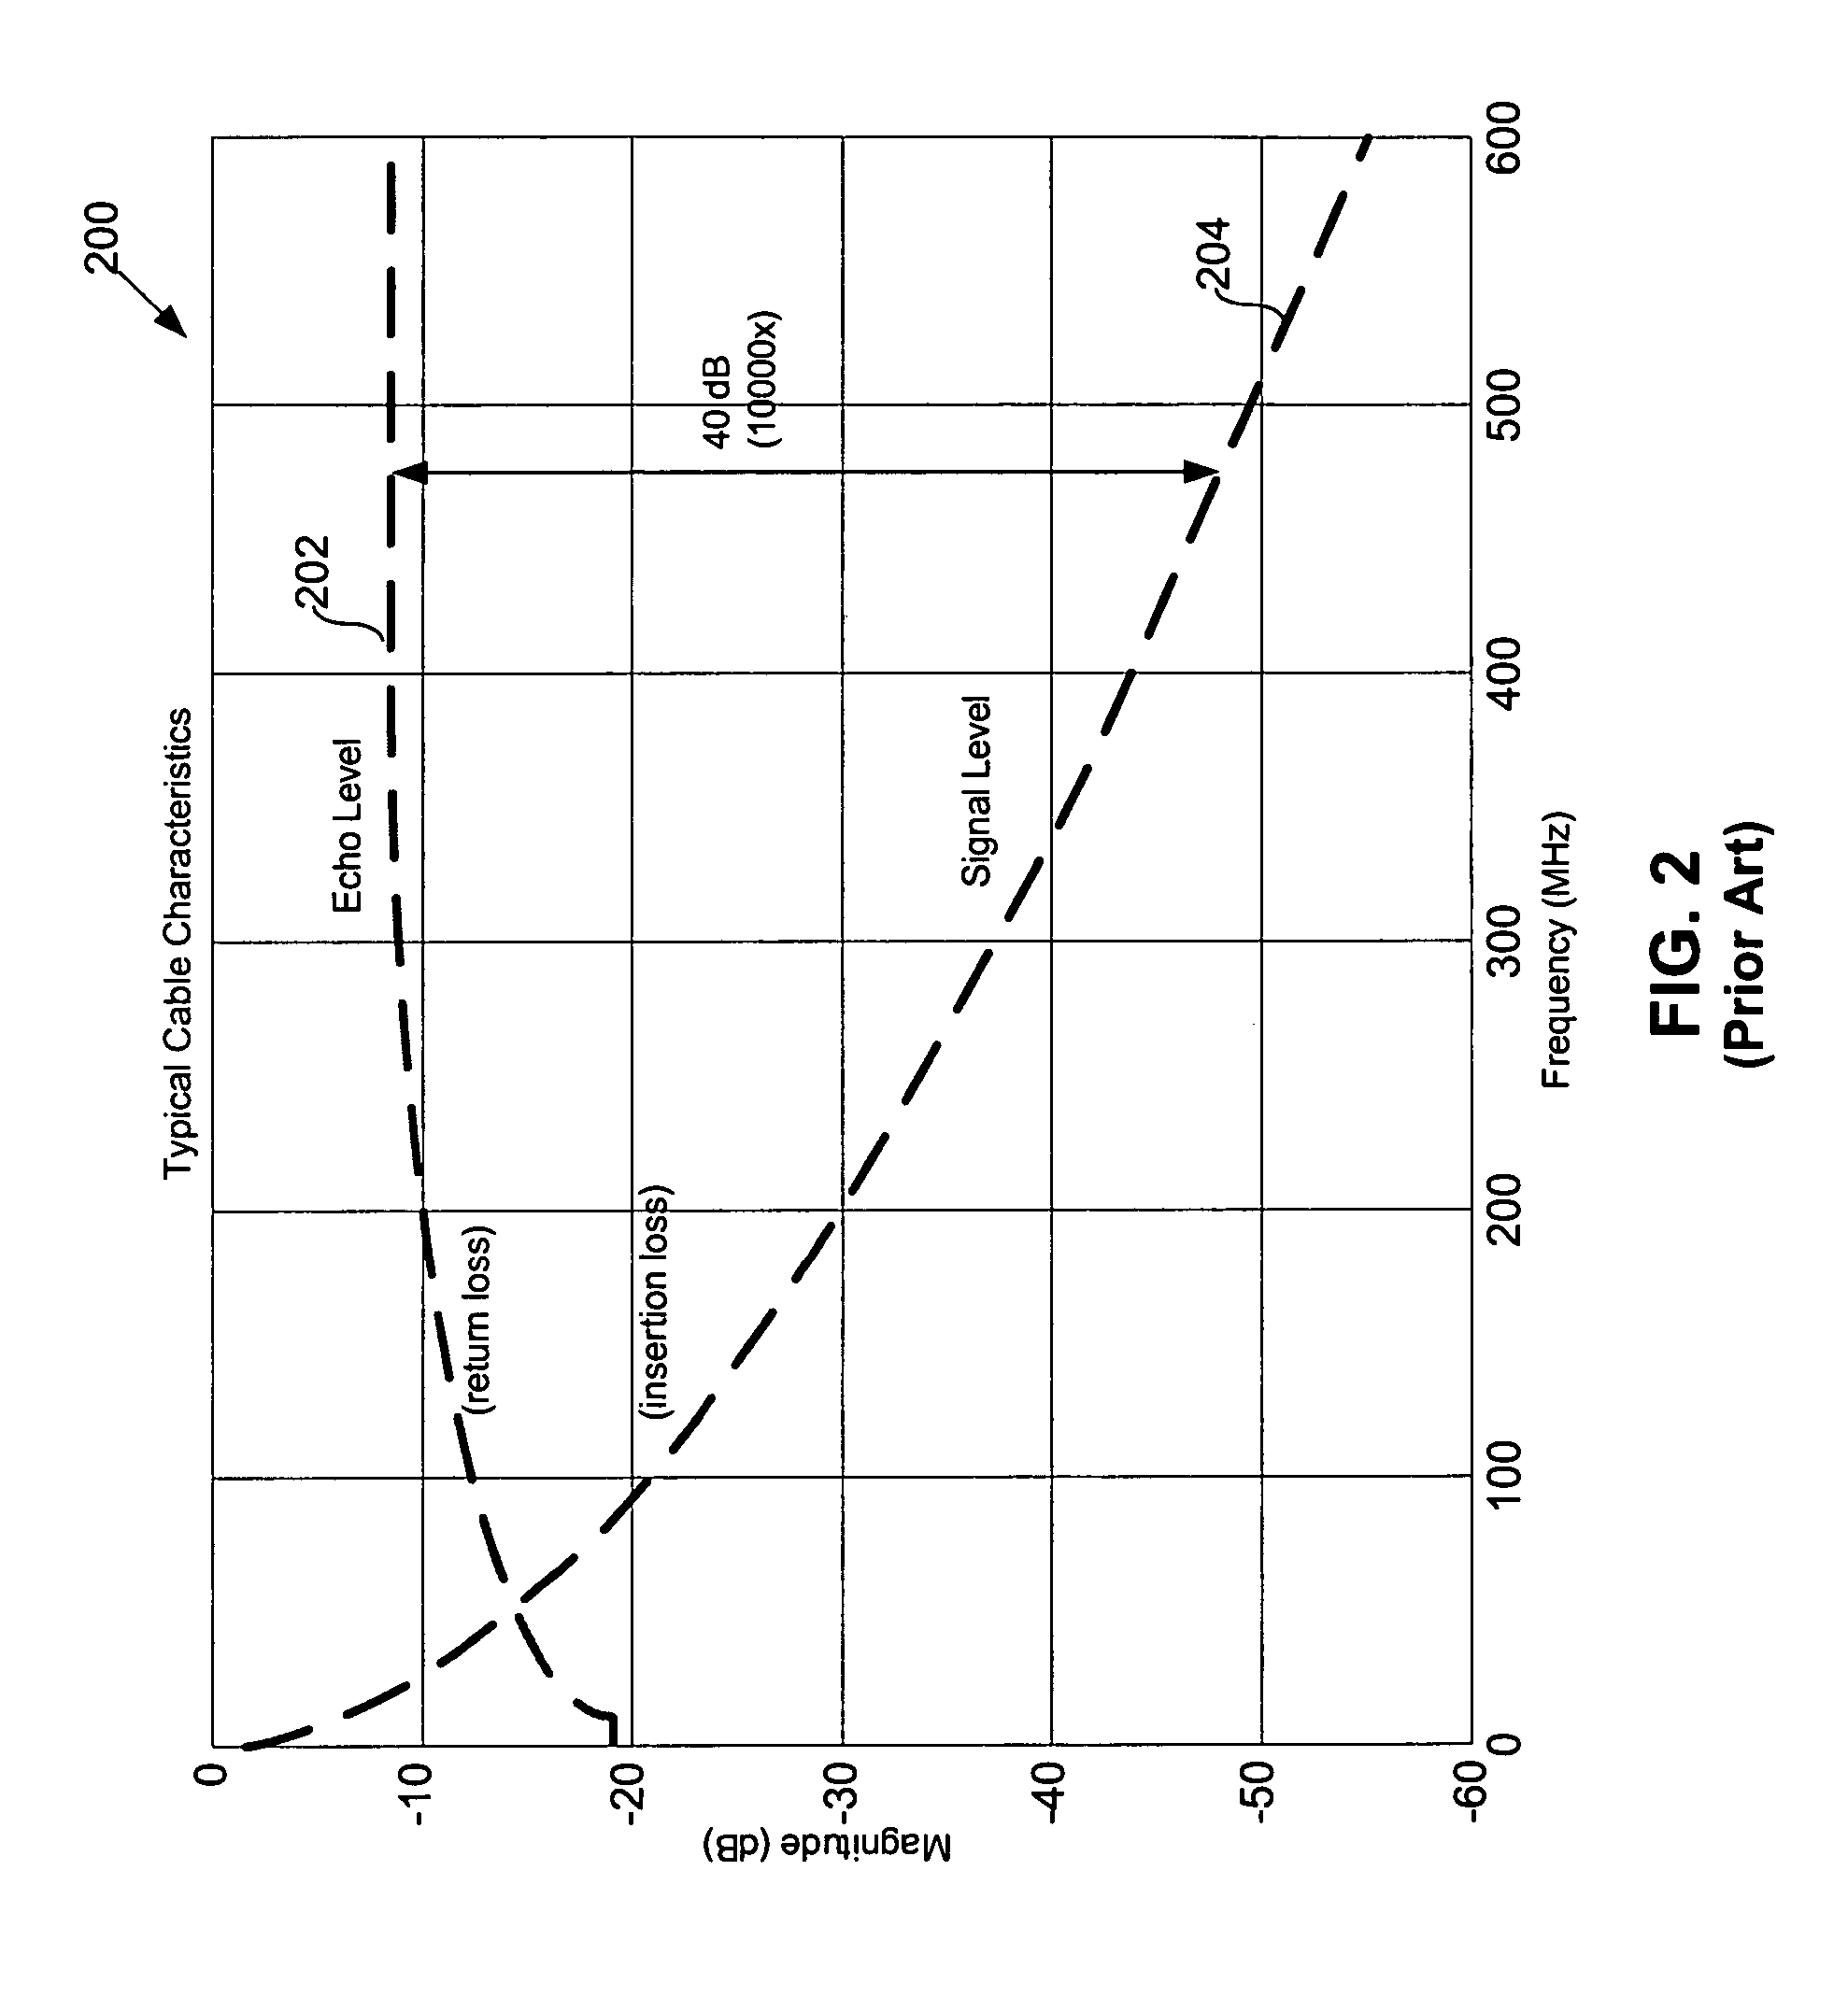 Partial duplex frequency domain modulator system and method